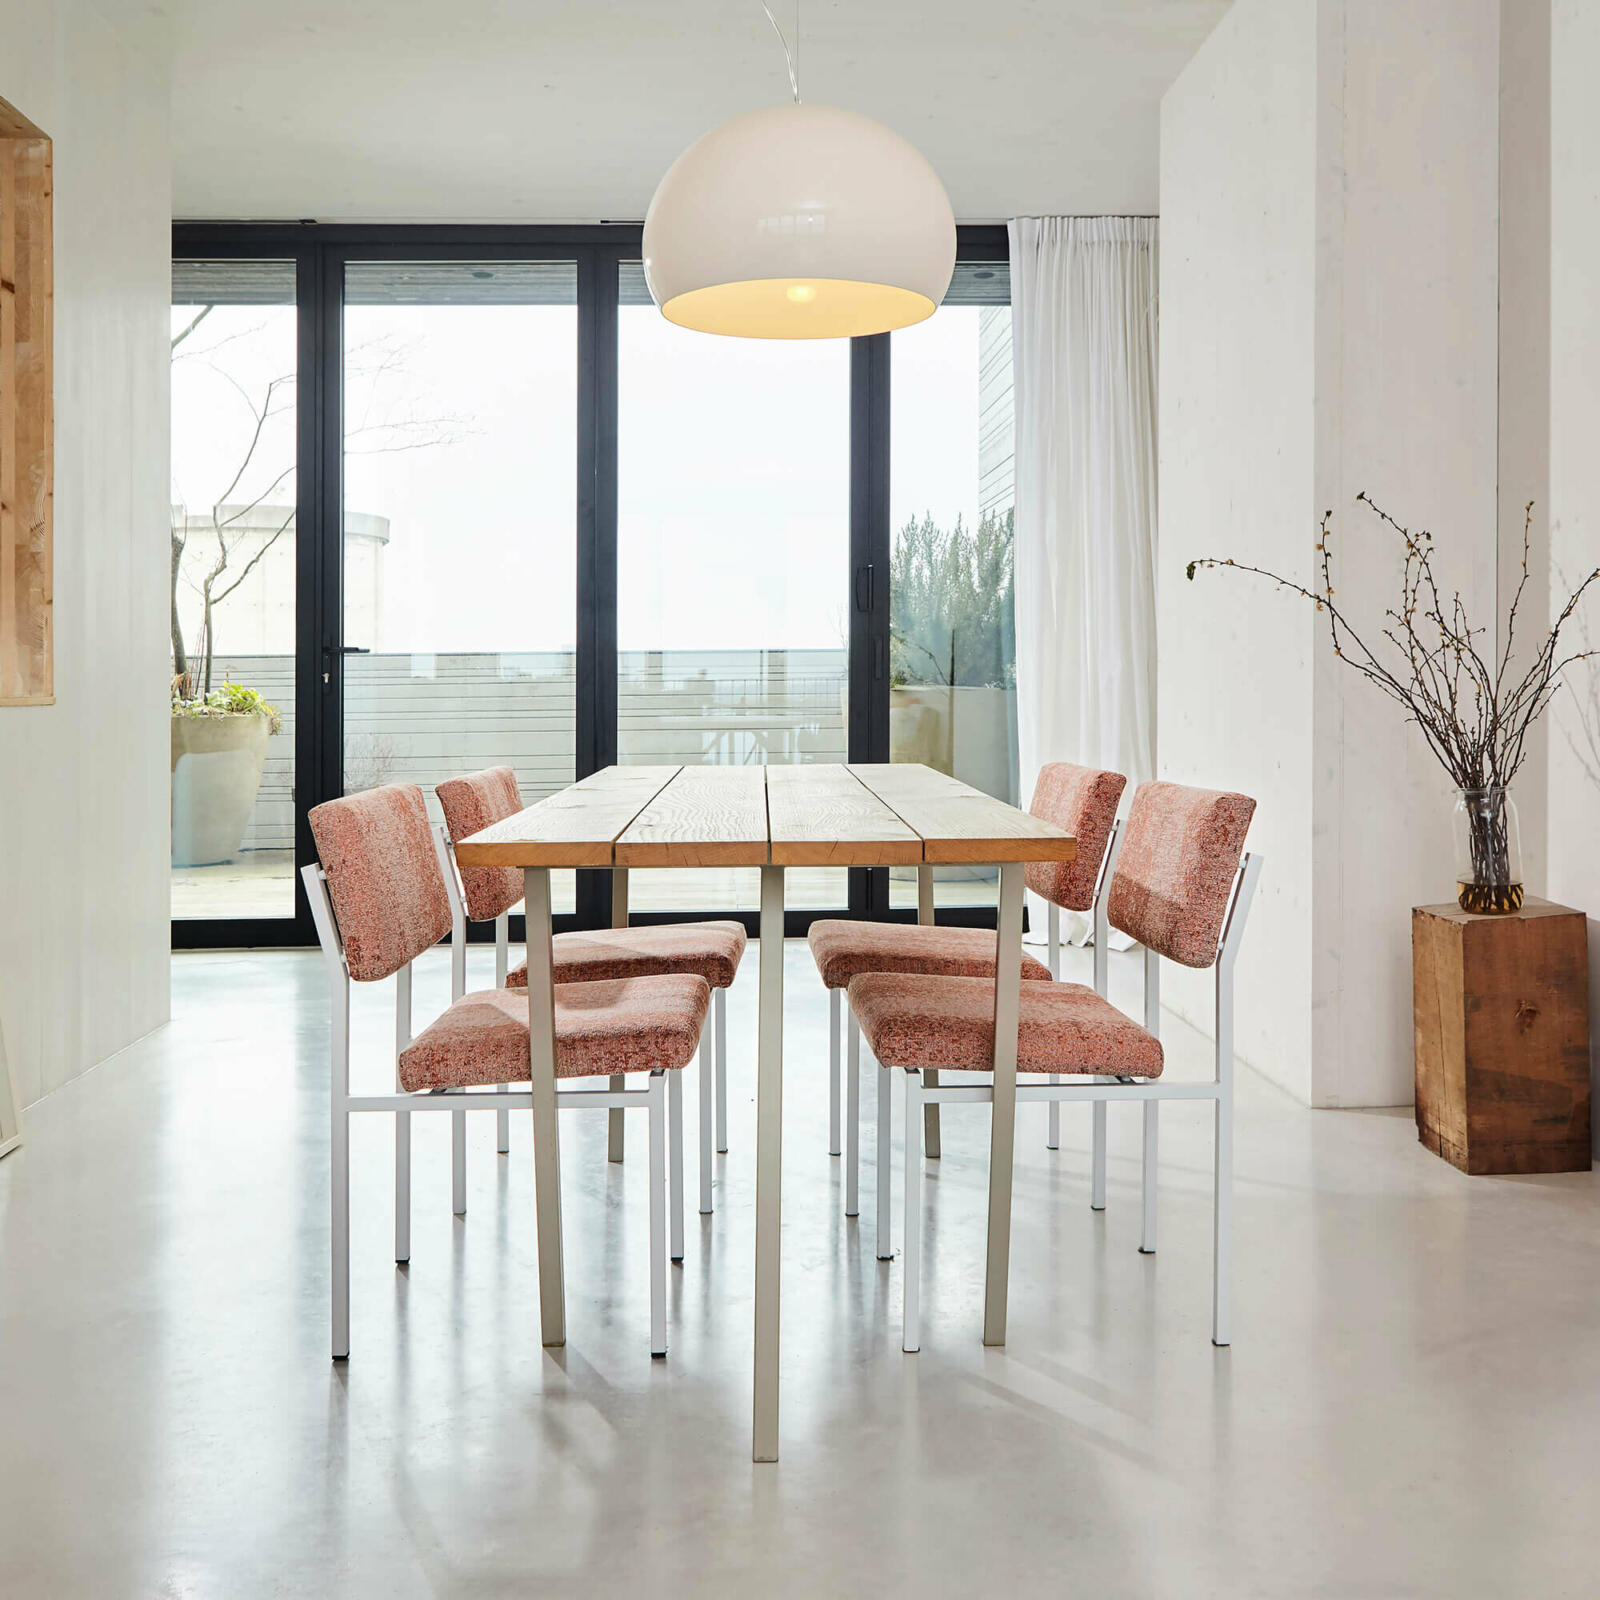 Modern dining room with table, chairs, and oversized pendant light.